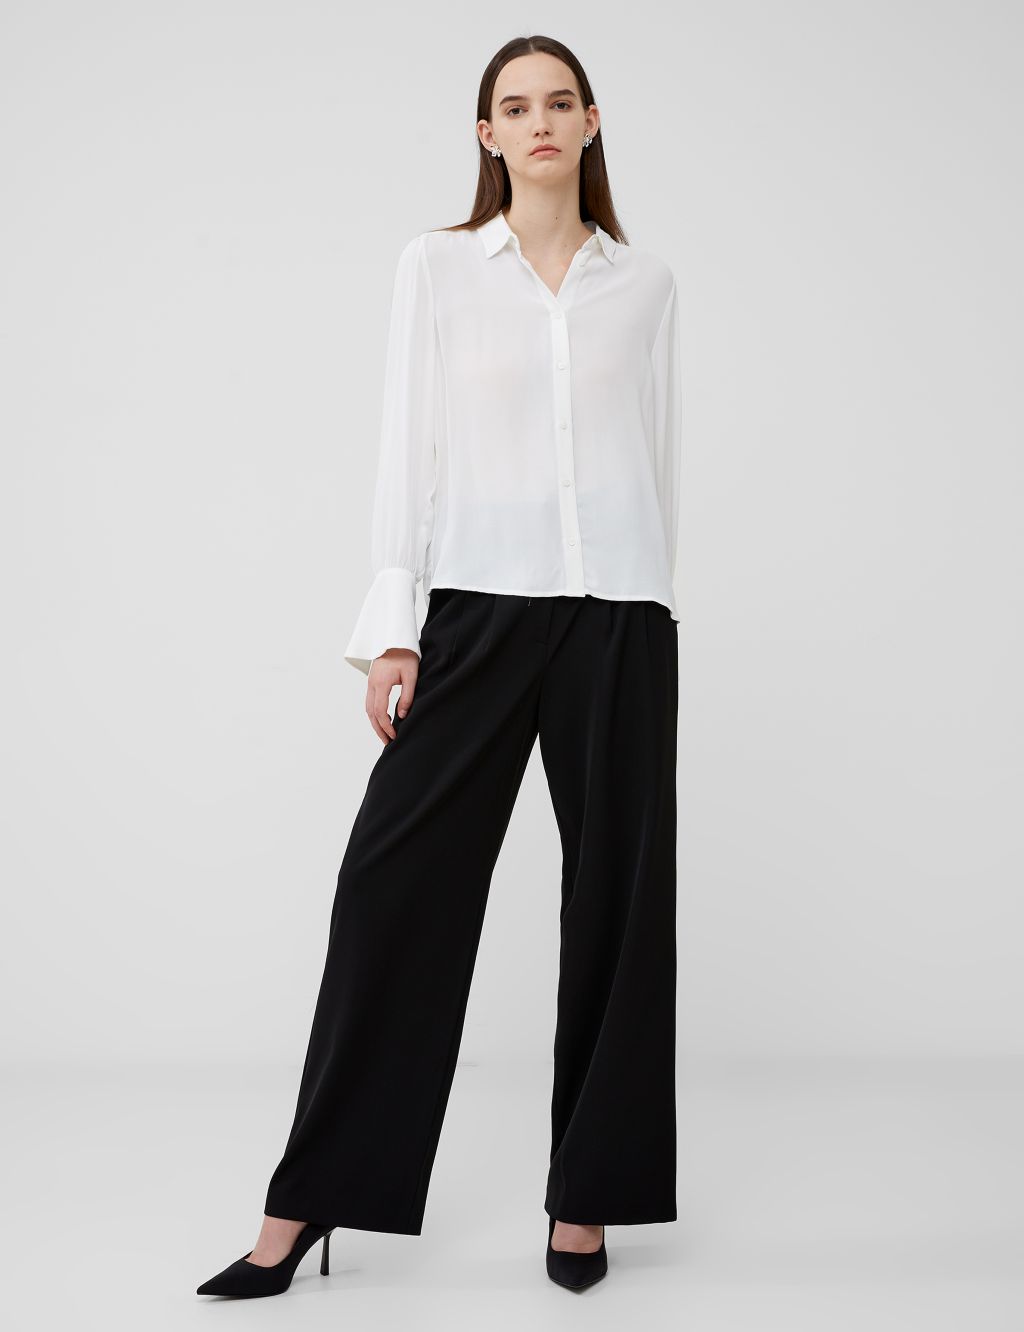 Buy Crepe Collared Shirt | French Connection | M&S